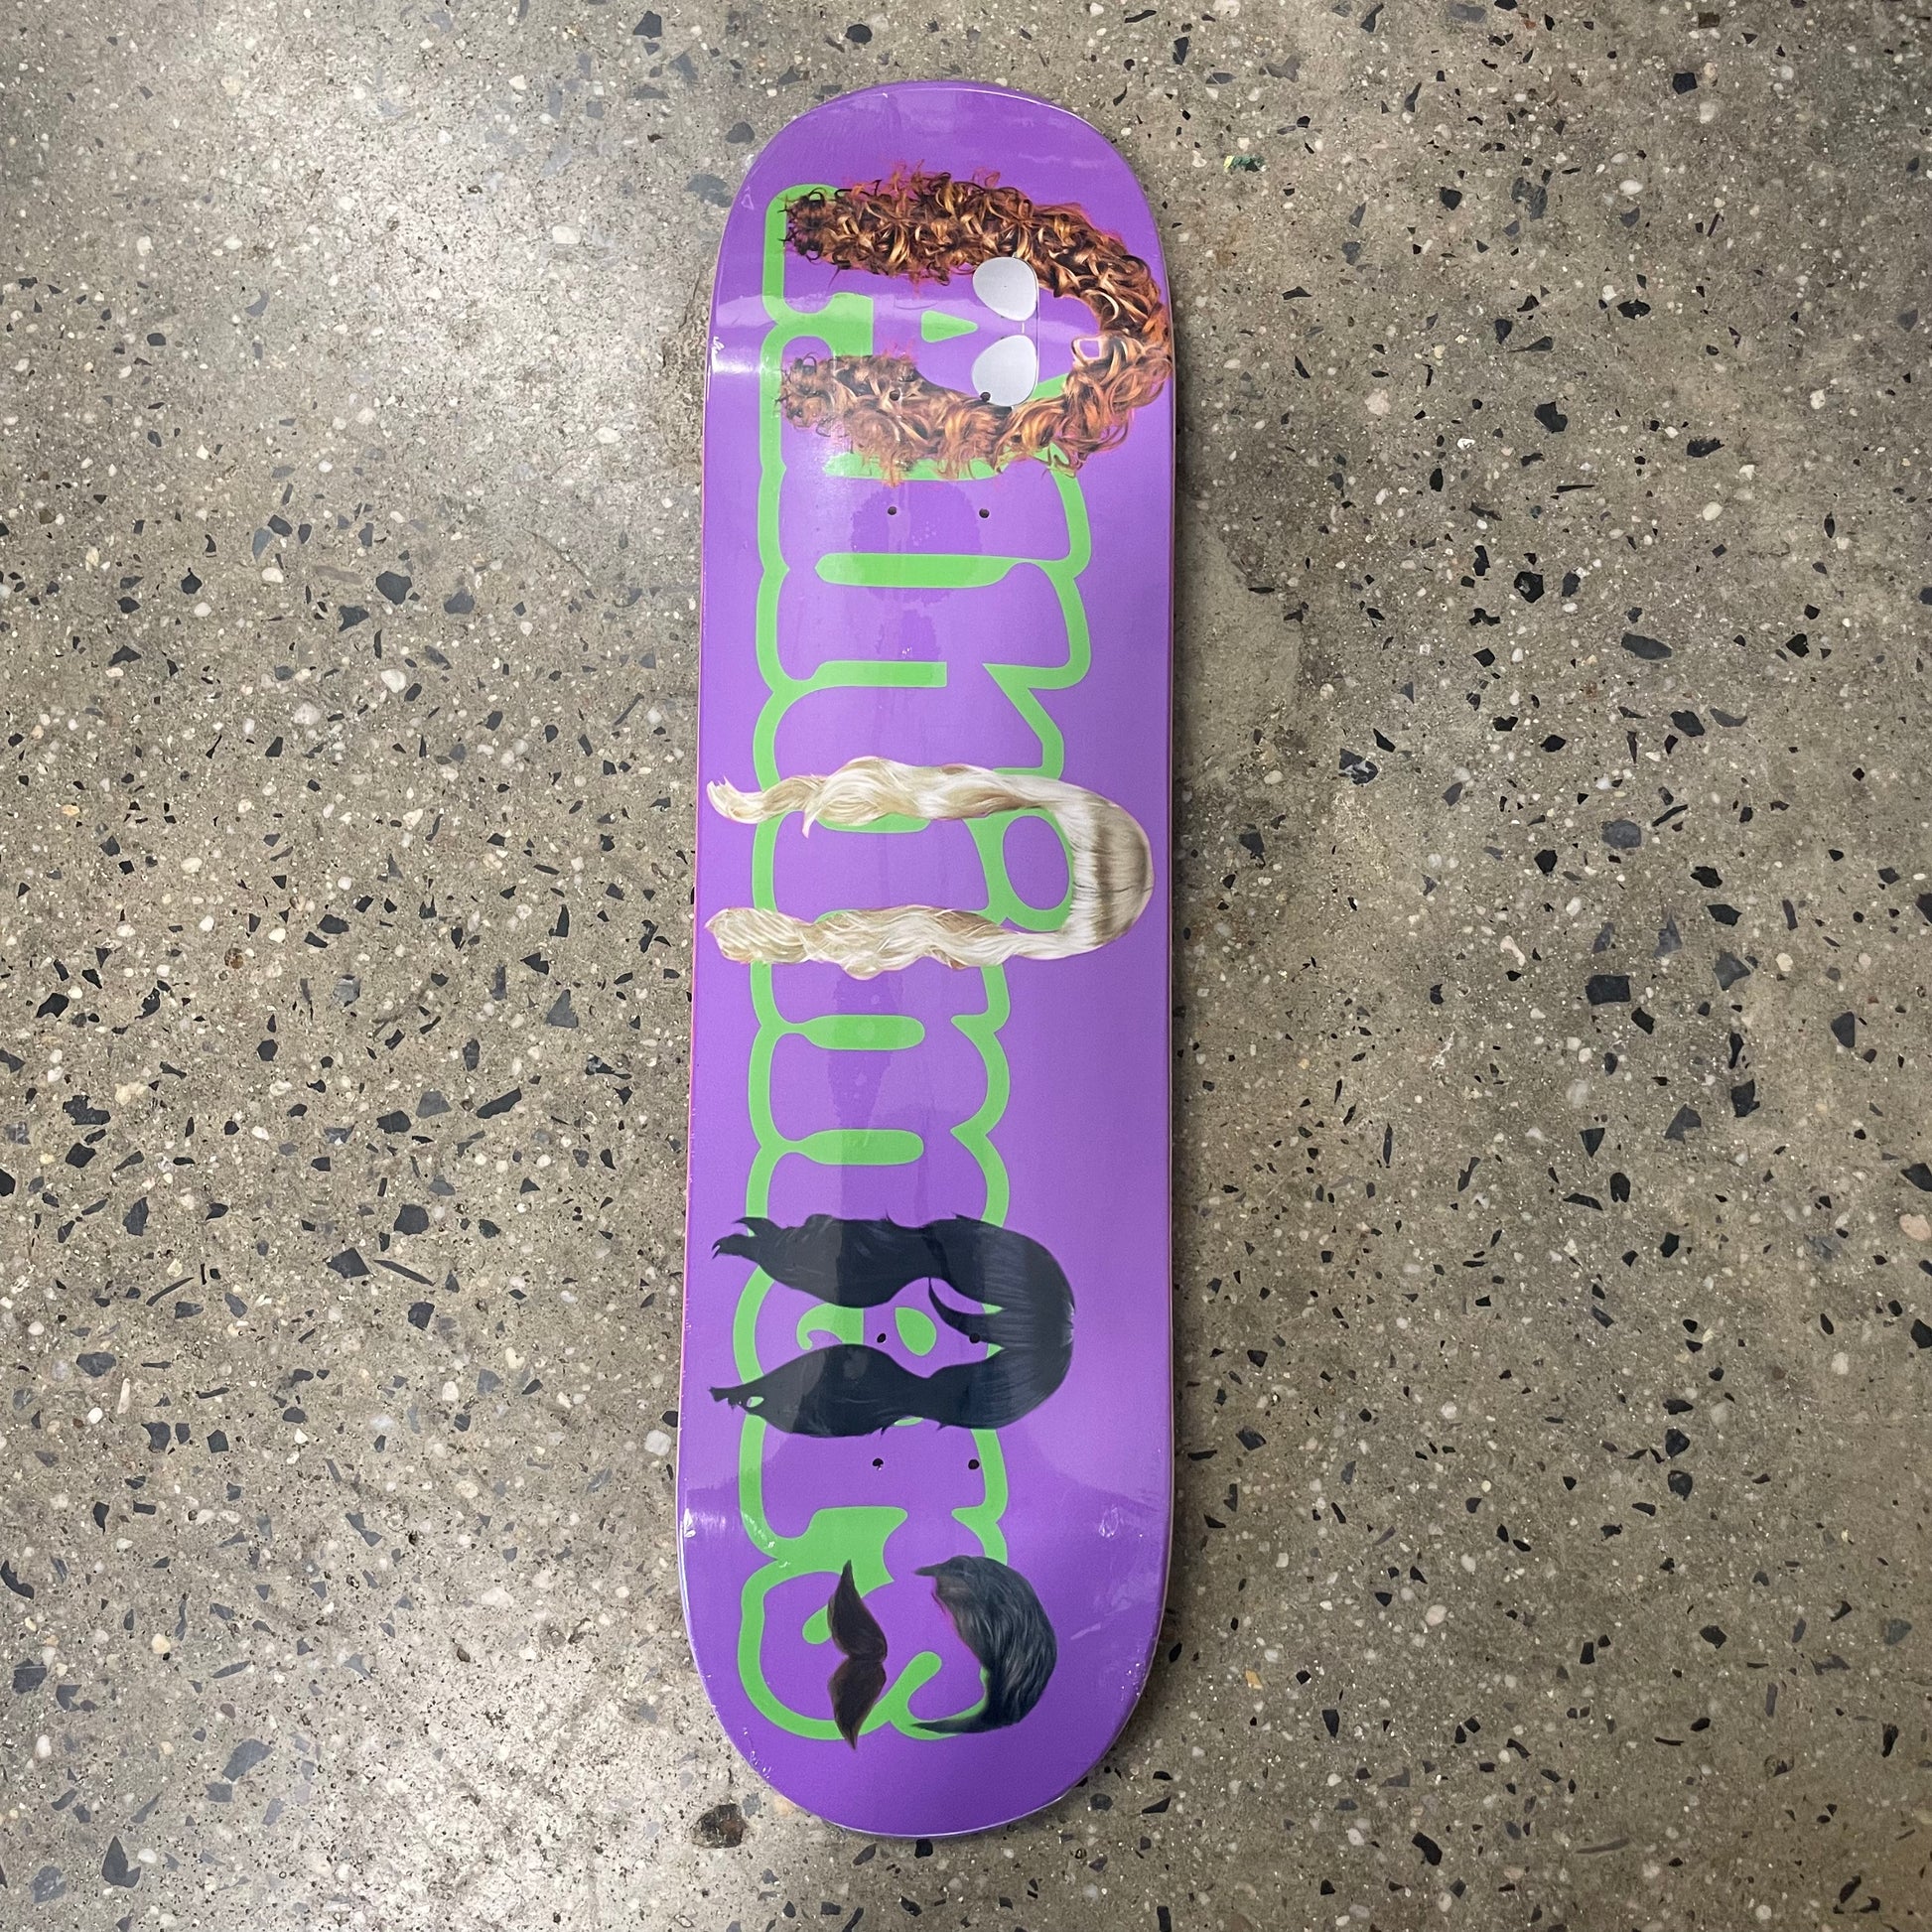 alltimers logo in green on purple skate deck, brown wig on A, blonde wig on i, Black wig on e, dark brown wig and mustache on s